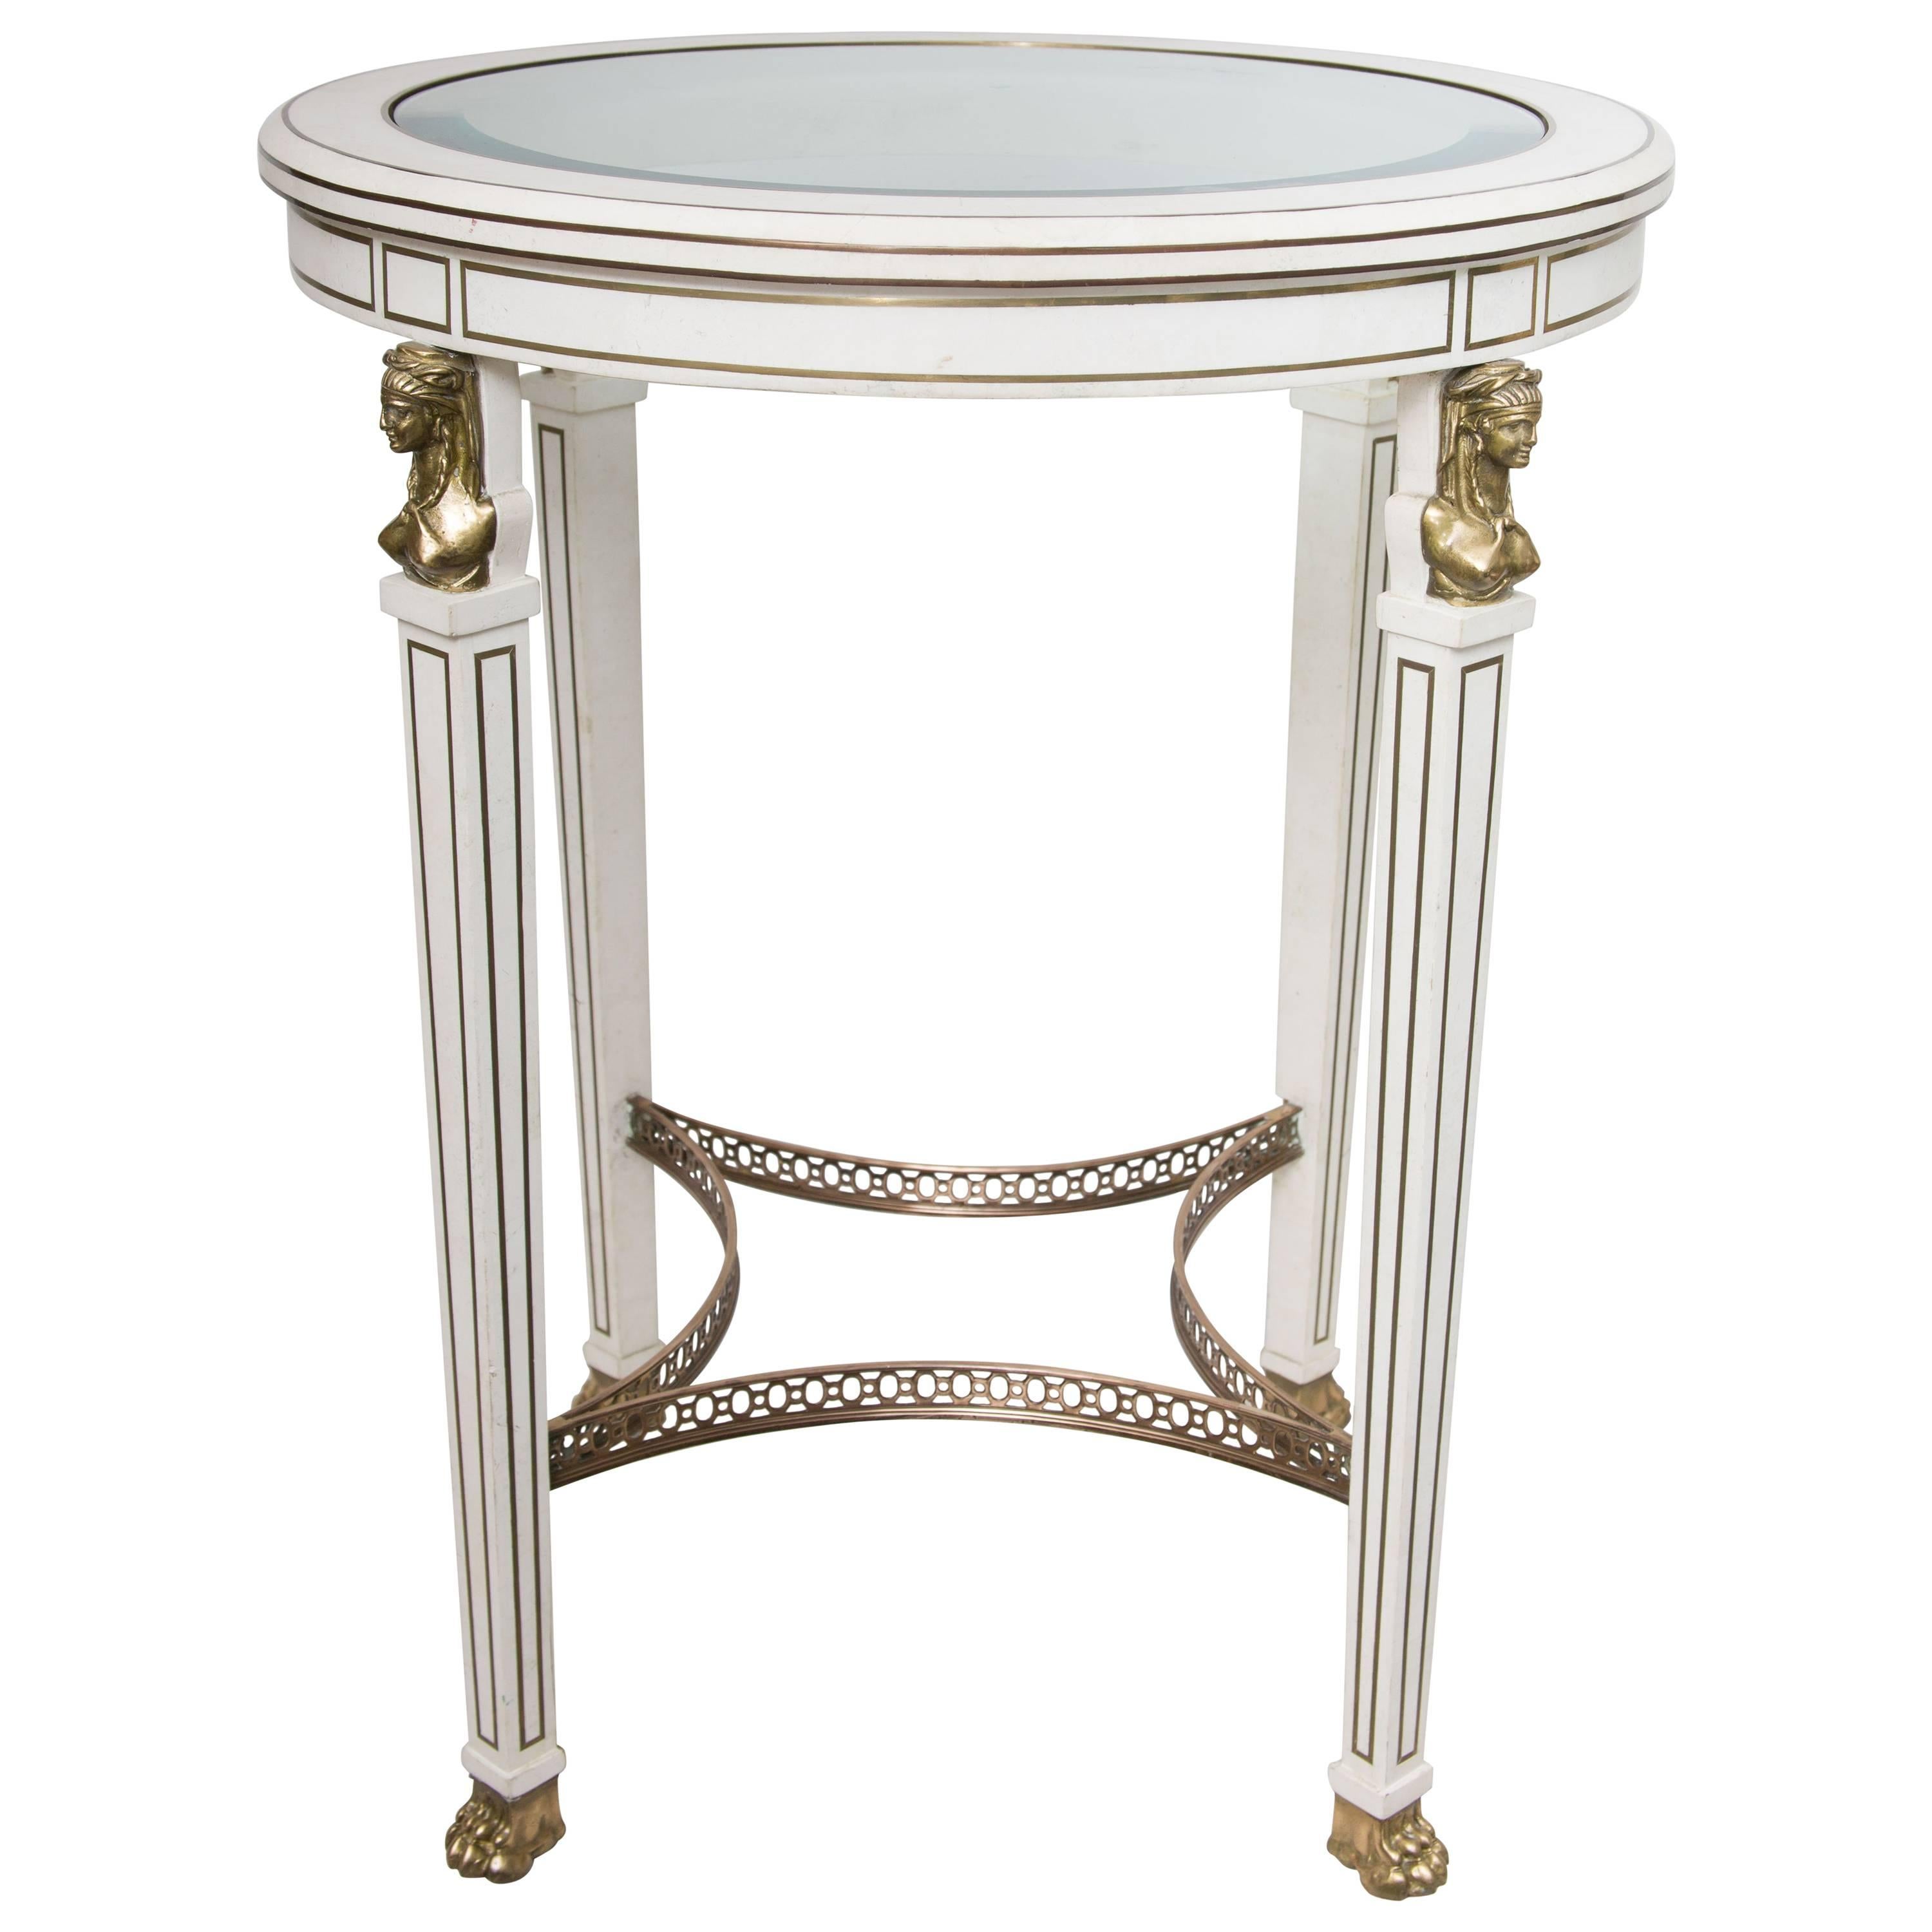 Empire Style Circular Side Table with Glass Inset Top